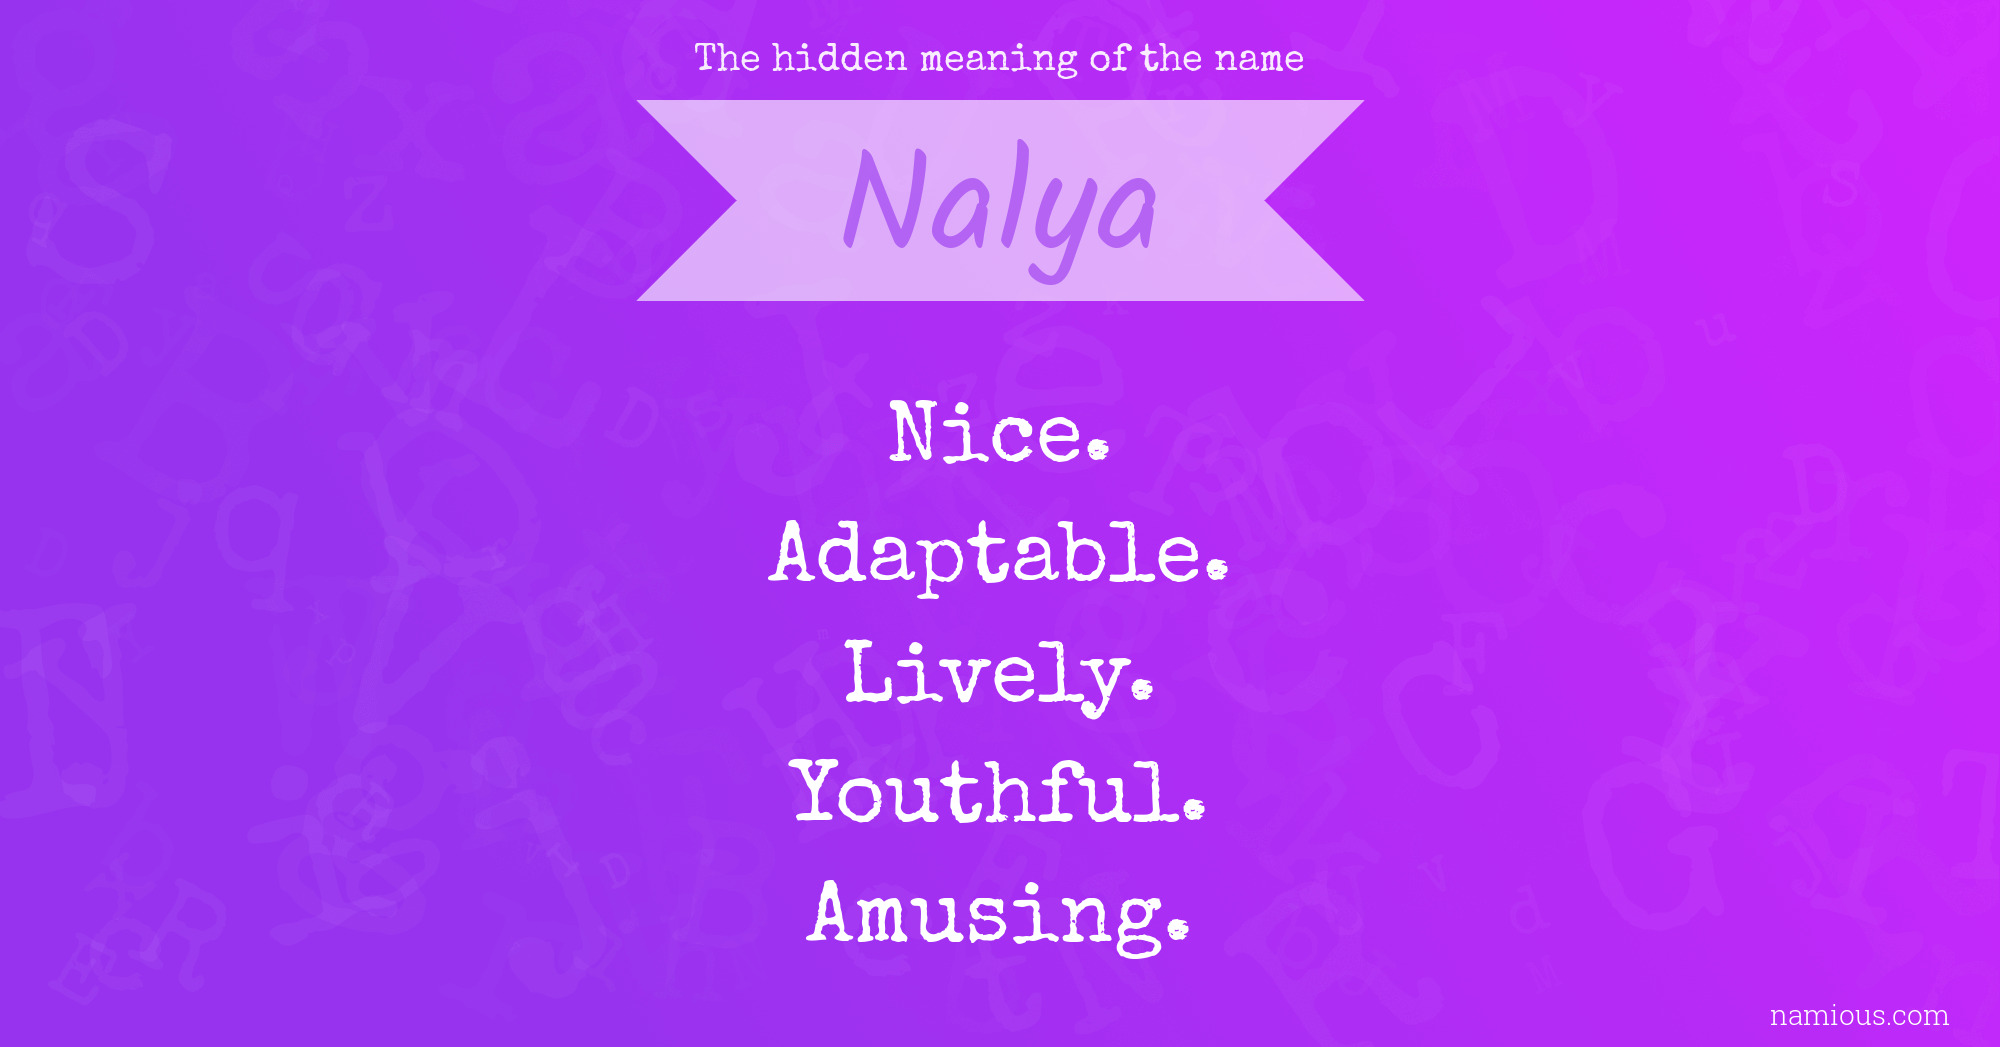 The hidden meaning of the name Nalya